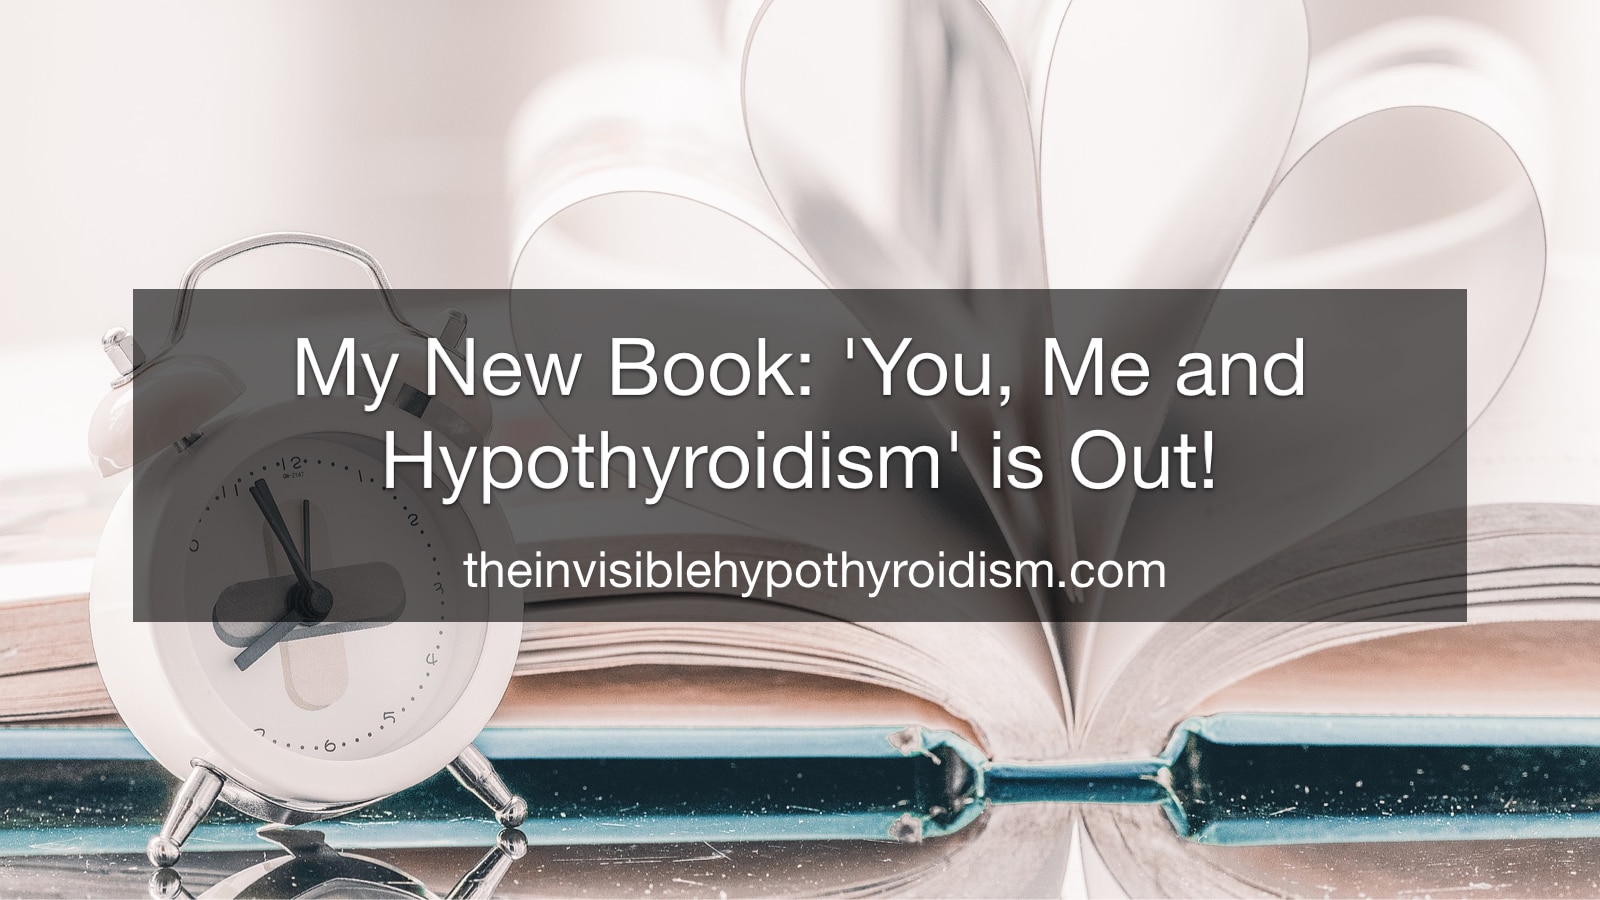 My New Book- 'You, Me and Hypothyroidism' is Out!